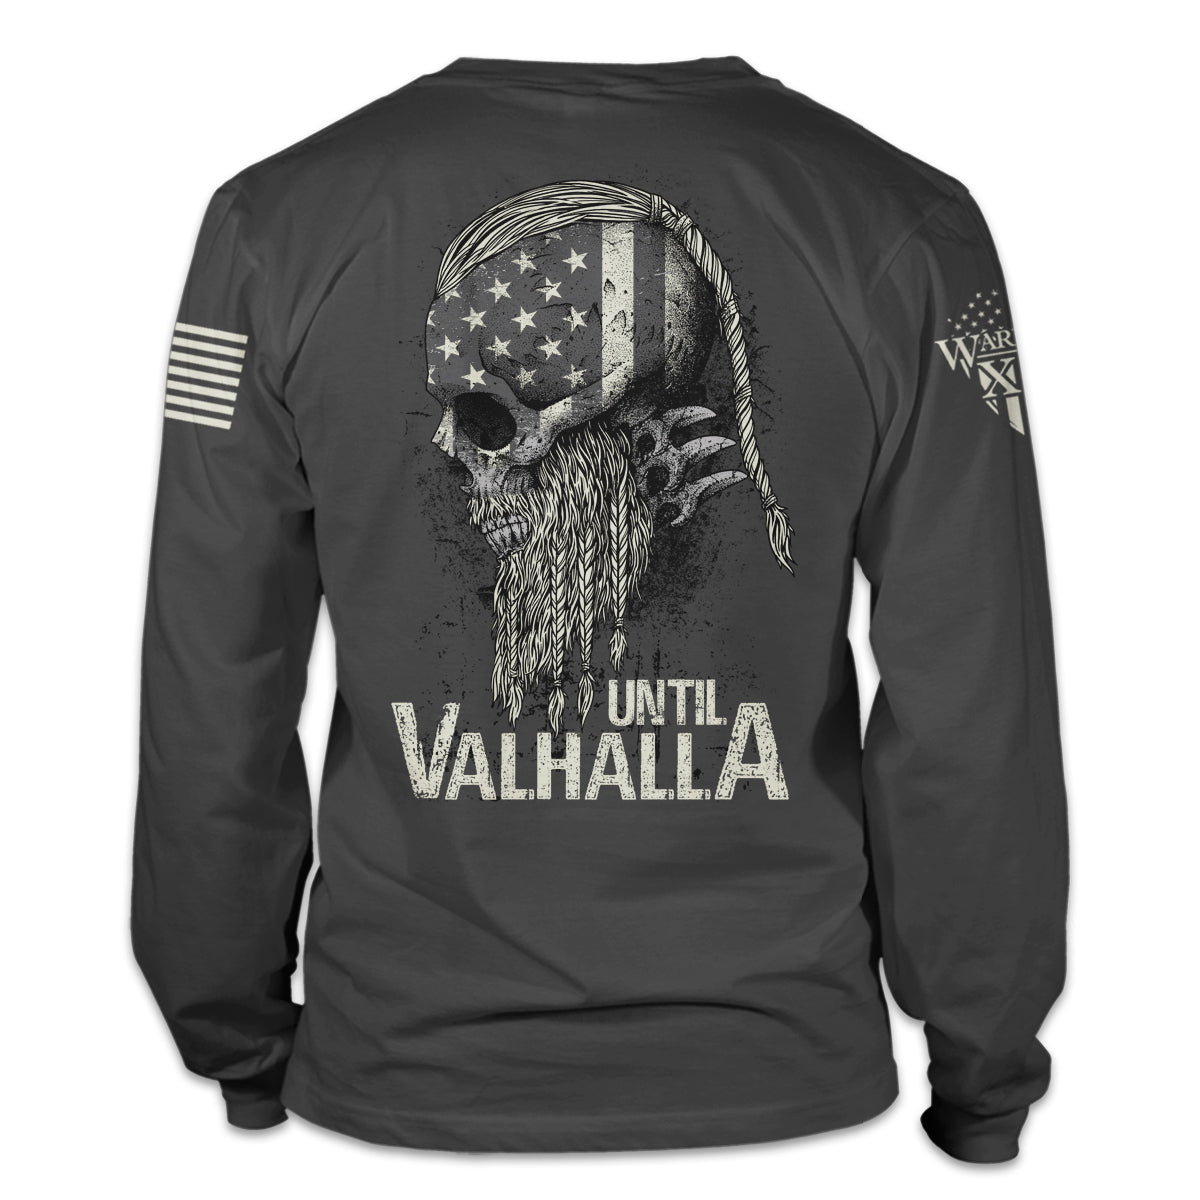 A dark grey long sleeve shirt with the words "Until Valhalla" and a side view of a viking printed on the back of the shirt.